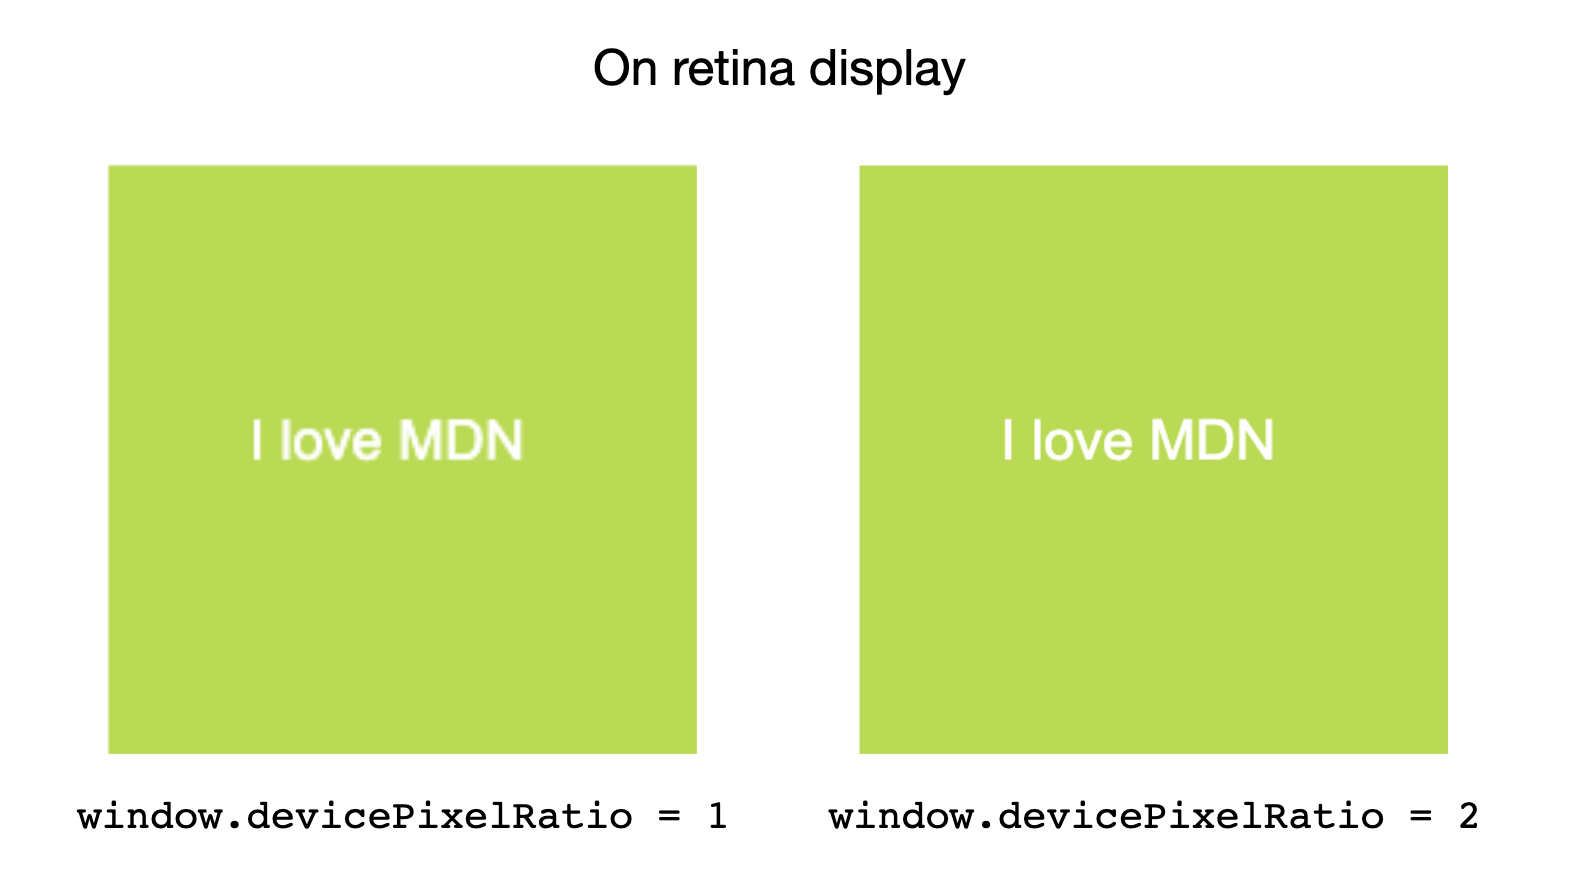 Side-by-side comparison of the effect of different devicePixelRatio values on an image shown in a retina display.